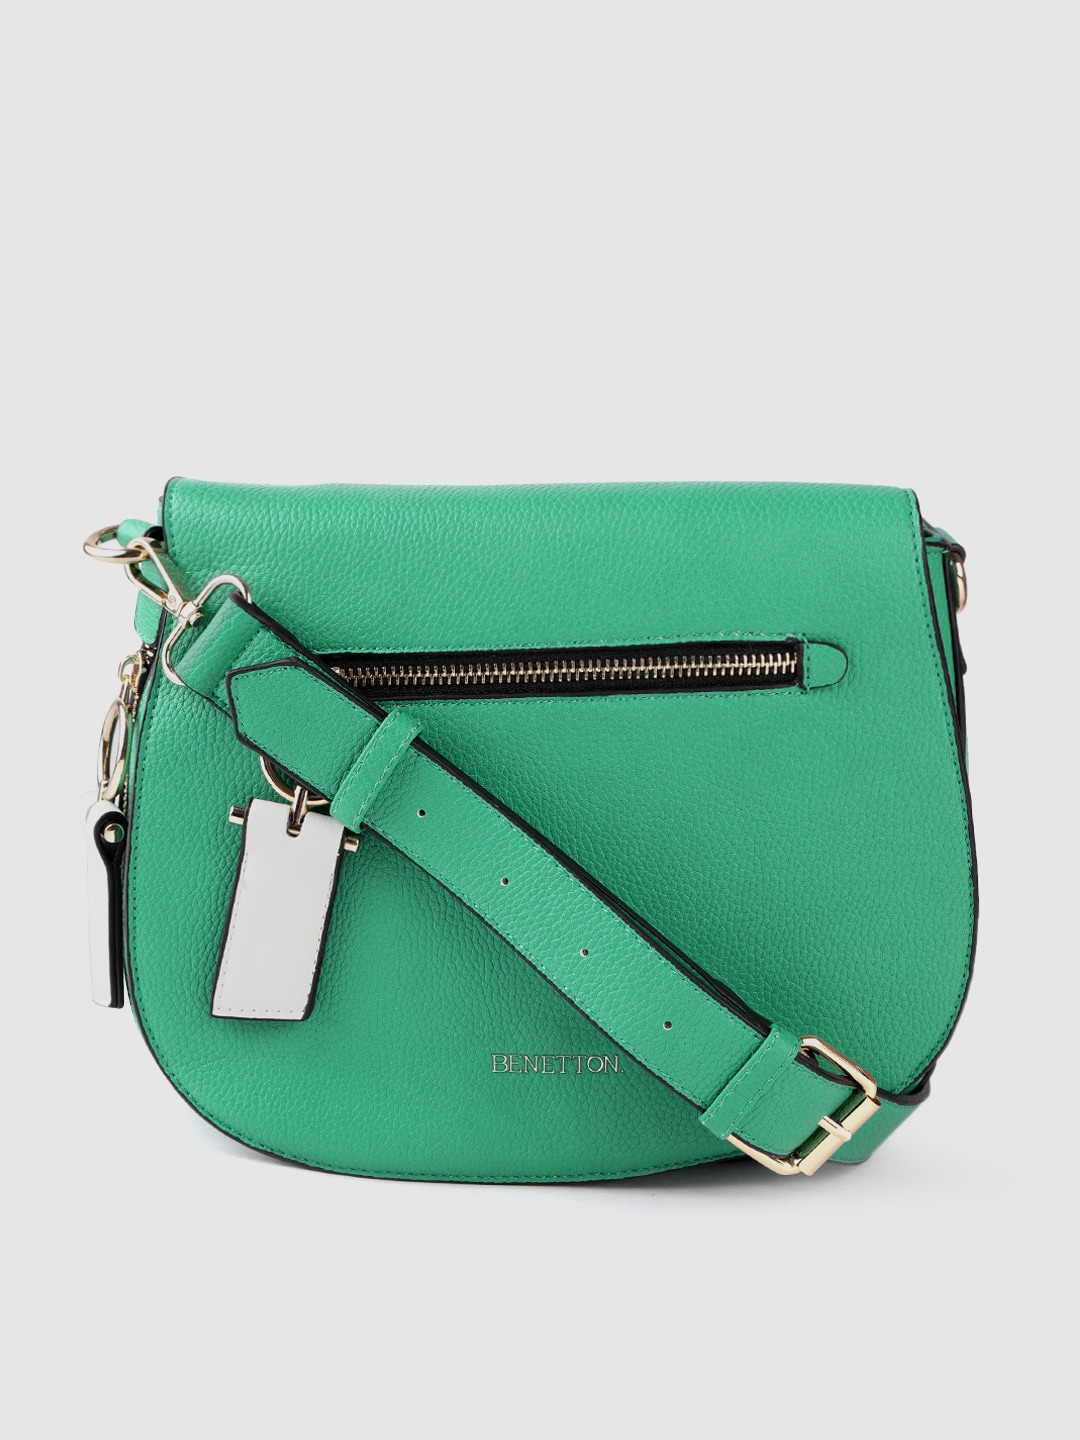 United Colors of Benetton Green Solid Sling Bag Price in India